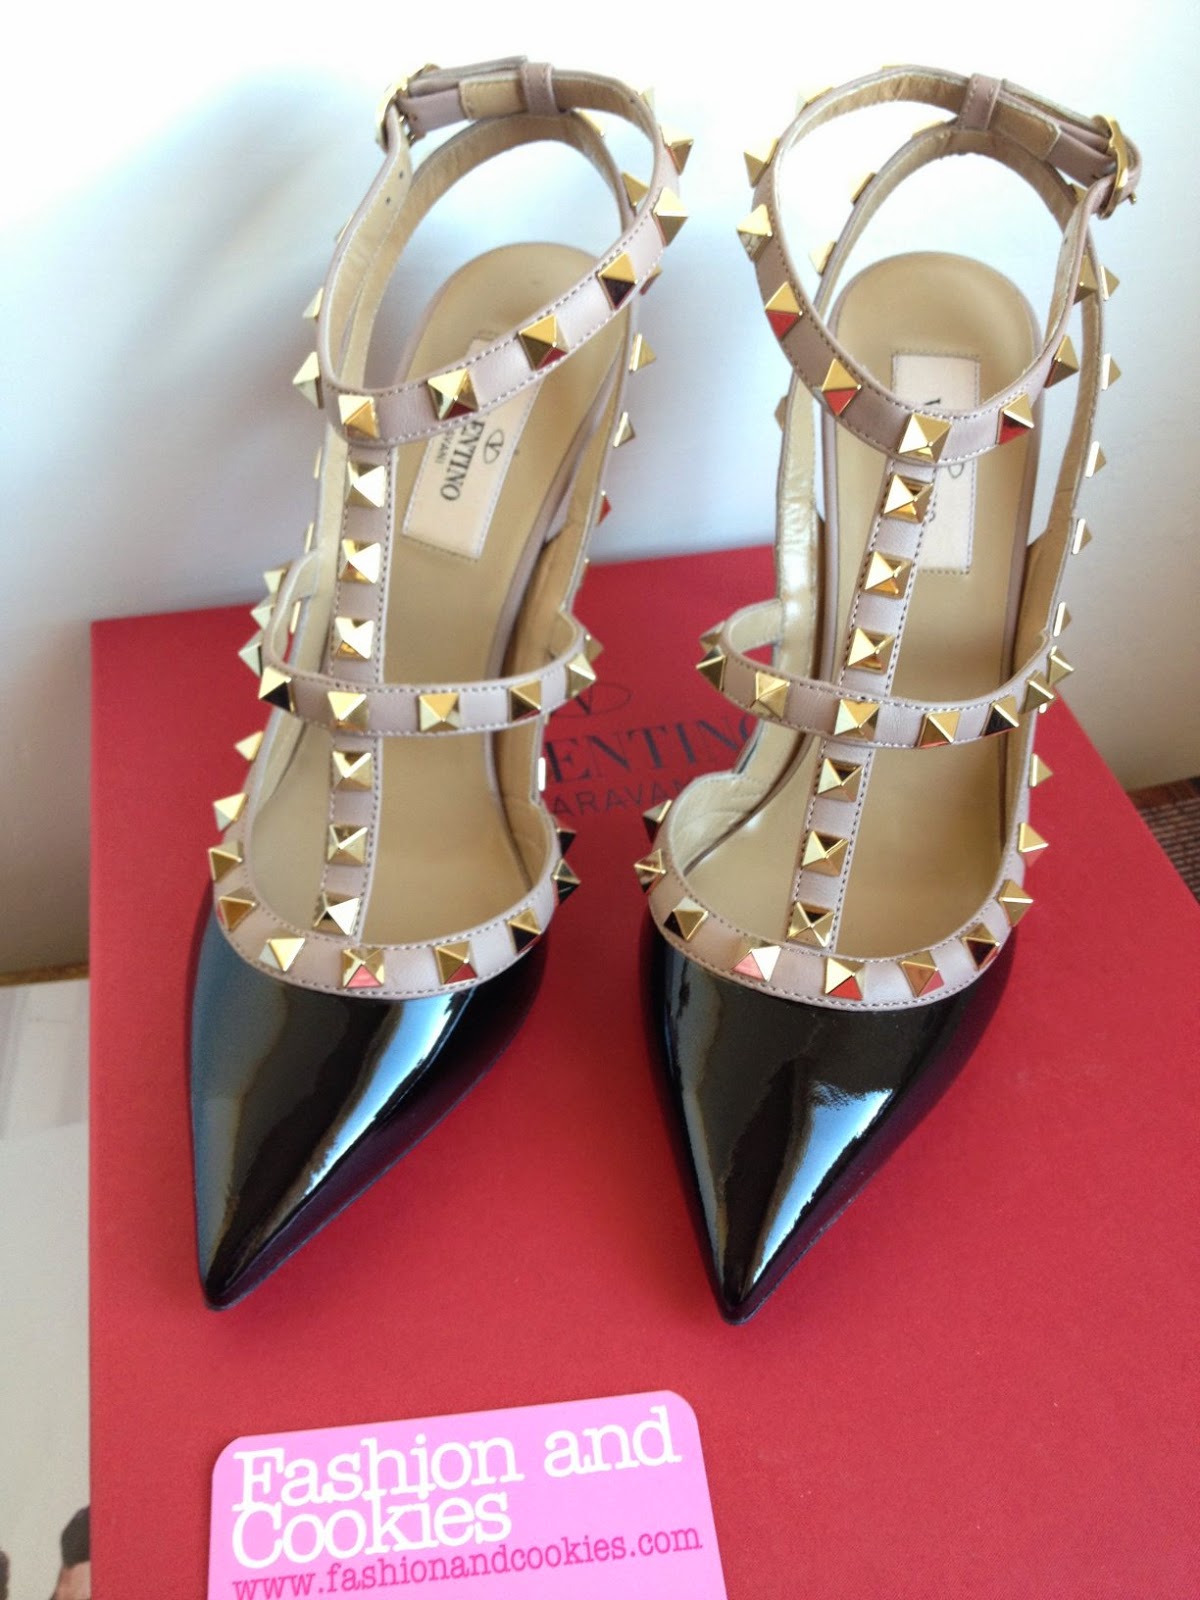 Valentino Rockstud pumps review | Fashion and Cookies - fashion and